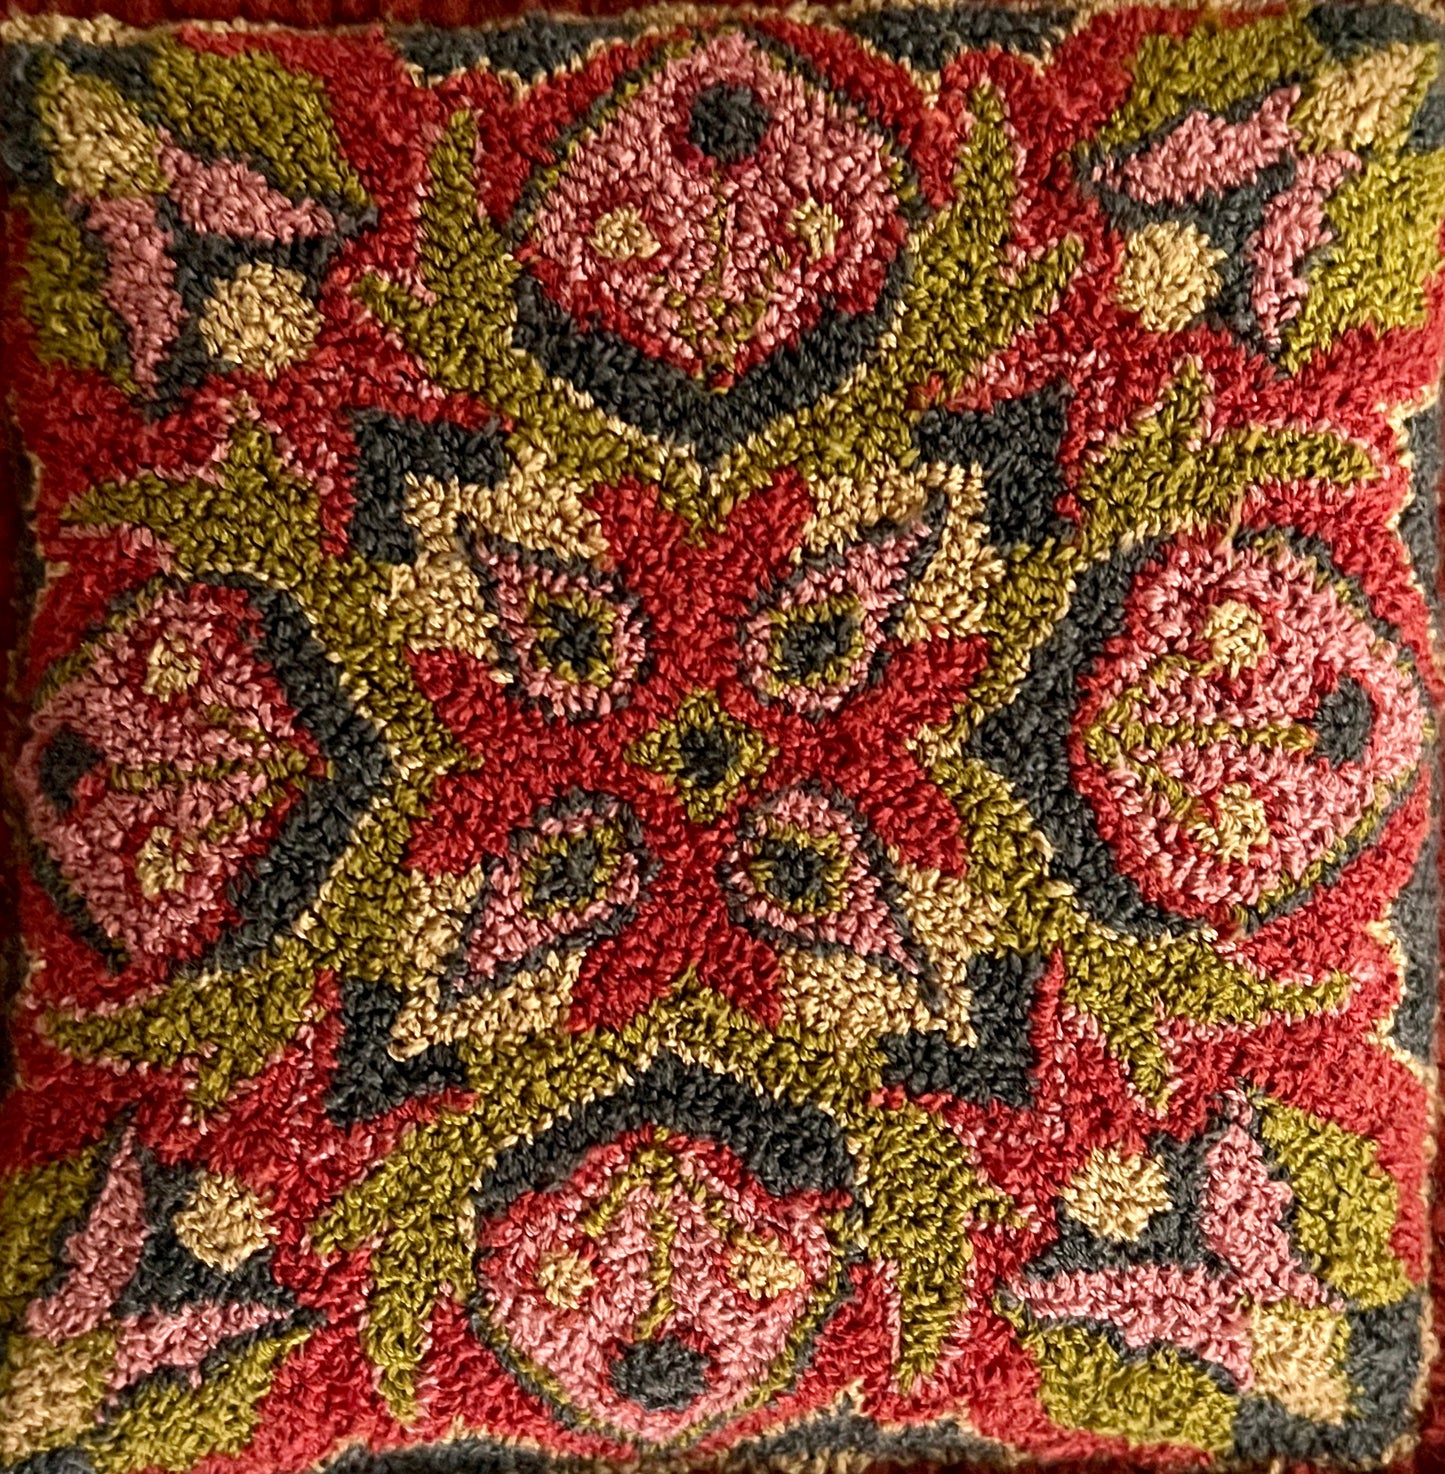 Red Diamond- Punch Needle Pattern by Orphaned Wool. This pattern is available as a paper punch needle pattern or a pattern on weaver's cloth fabric. This is a stunning punch needle design to create.